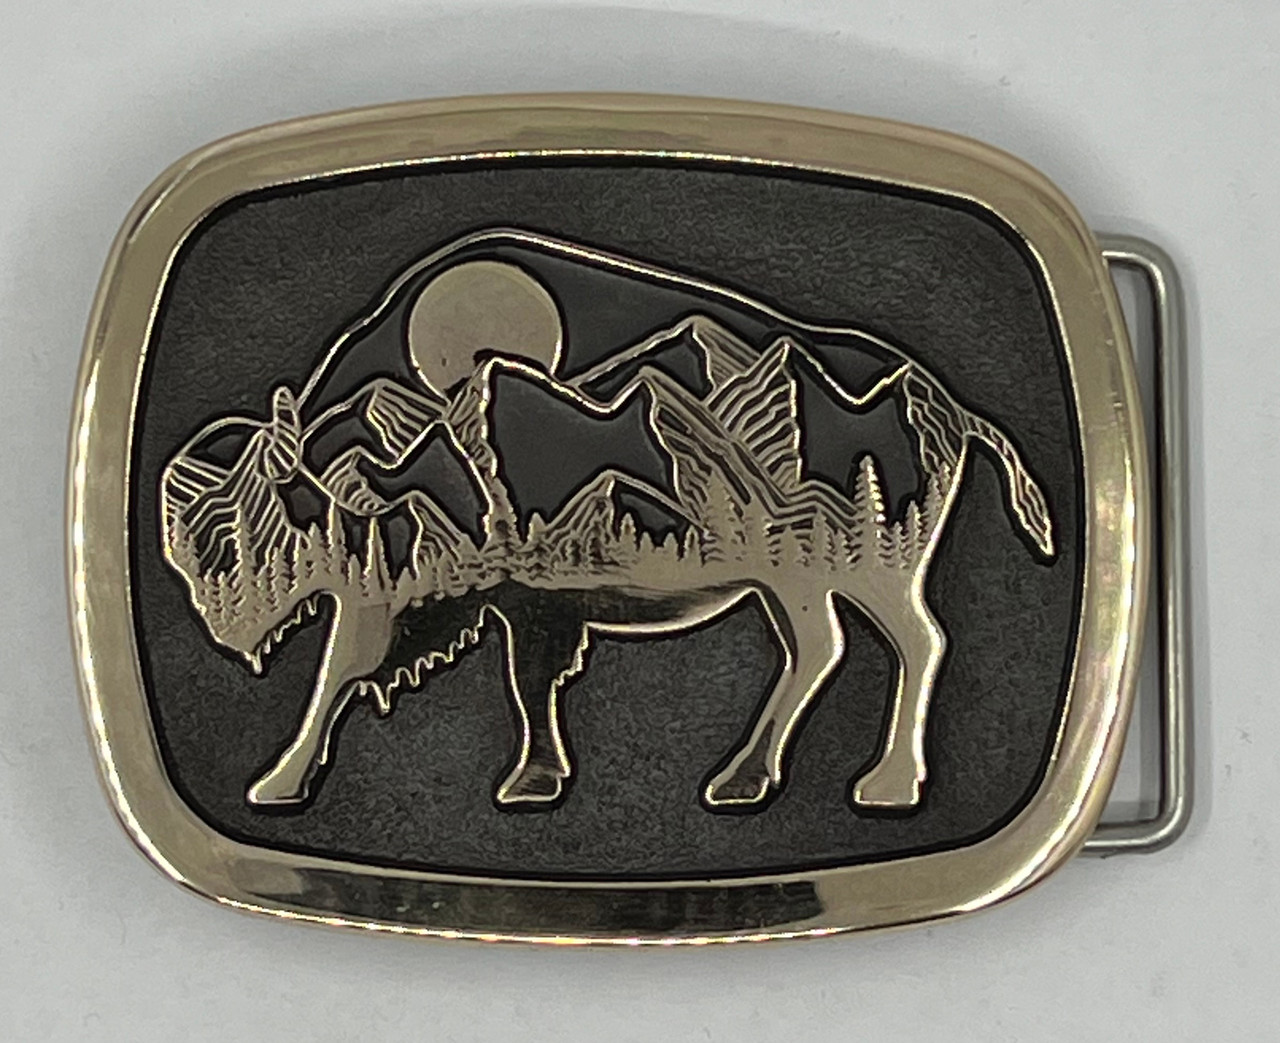  Levi's Legacy (Buffalo) Buckle (RESTRICTED)